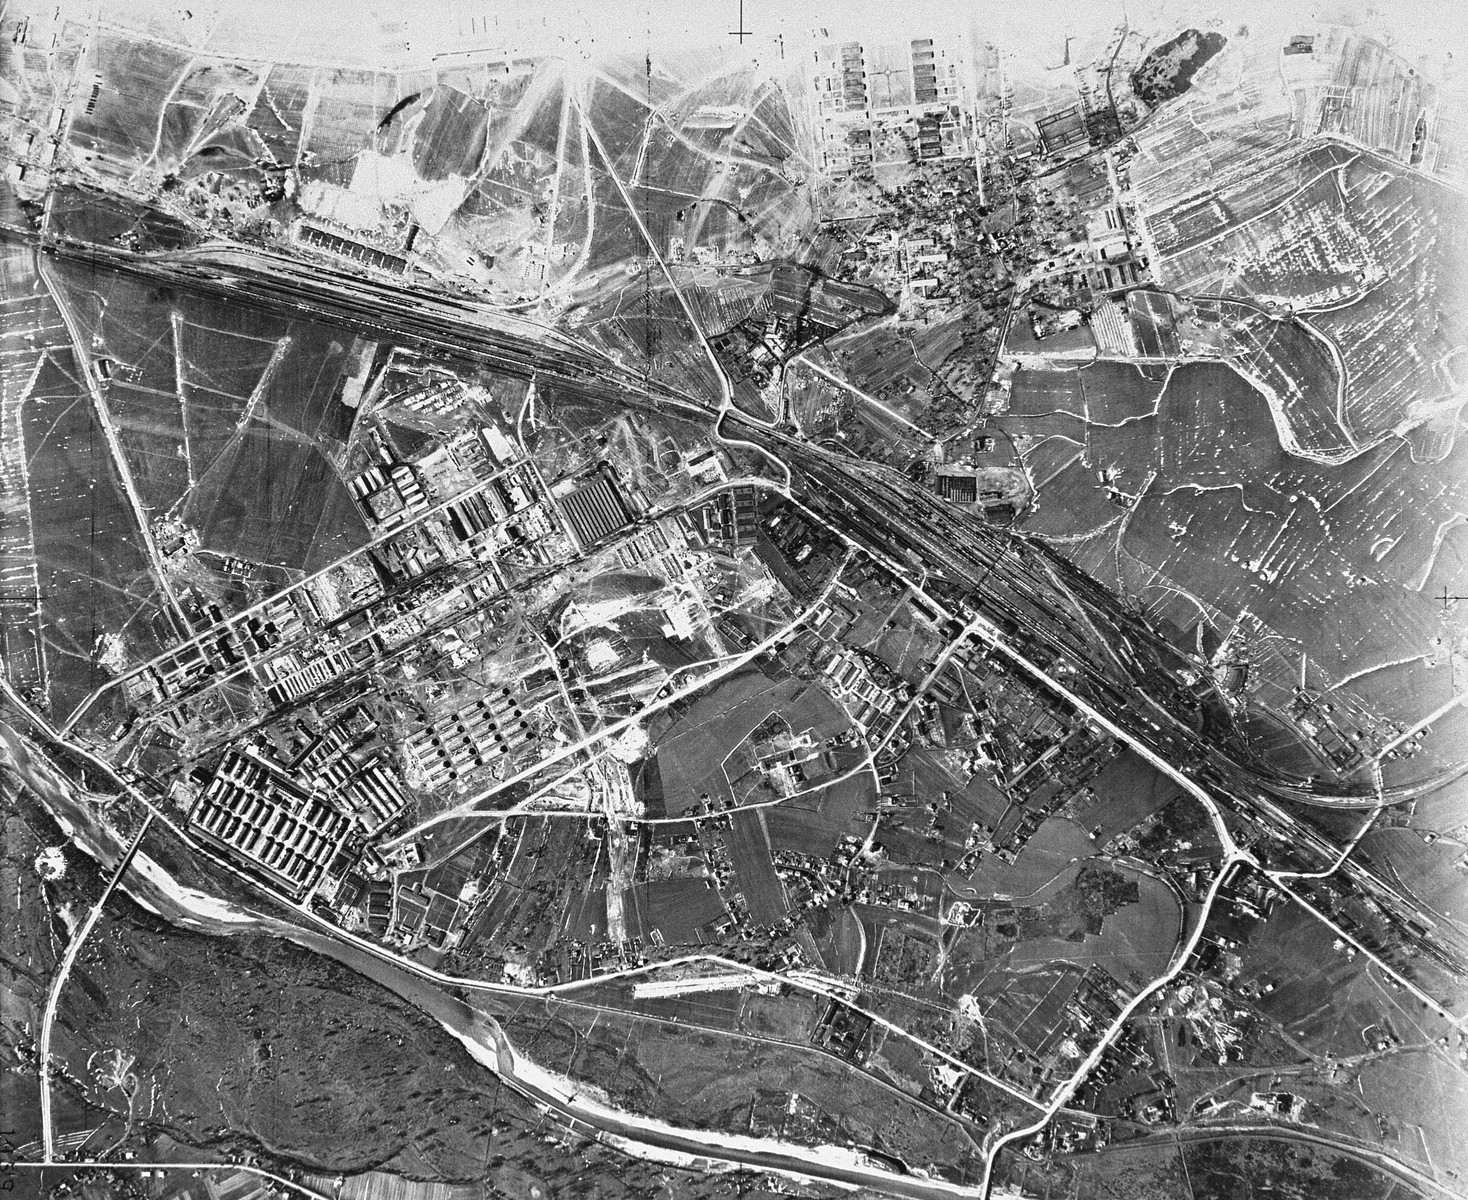 An aerial reconnaissance photograph of the Auschwitz area showing the Auschwitz I camp. [Oversized photo]

Mission:  60 PR 288 60 SQ;  Scale: 1/15,569;  Focal Length: 20";  Altitude: 26,000'